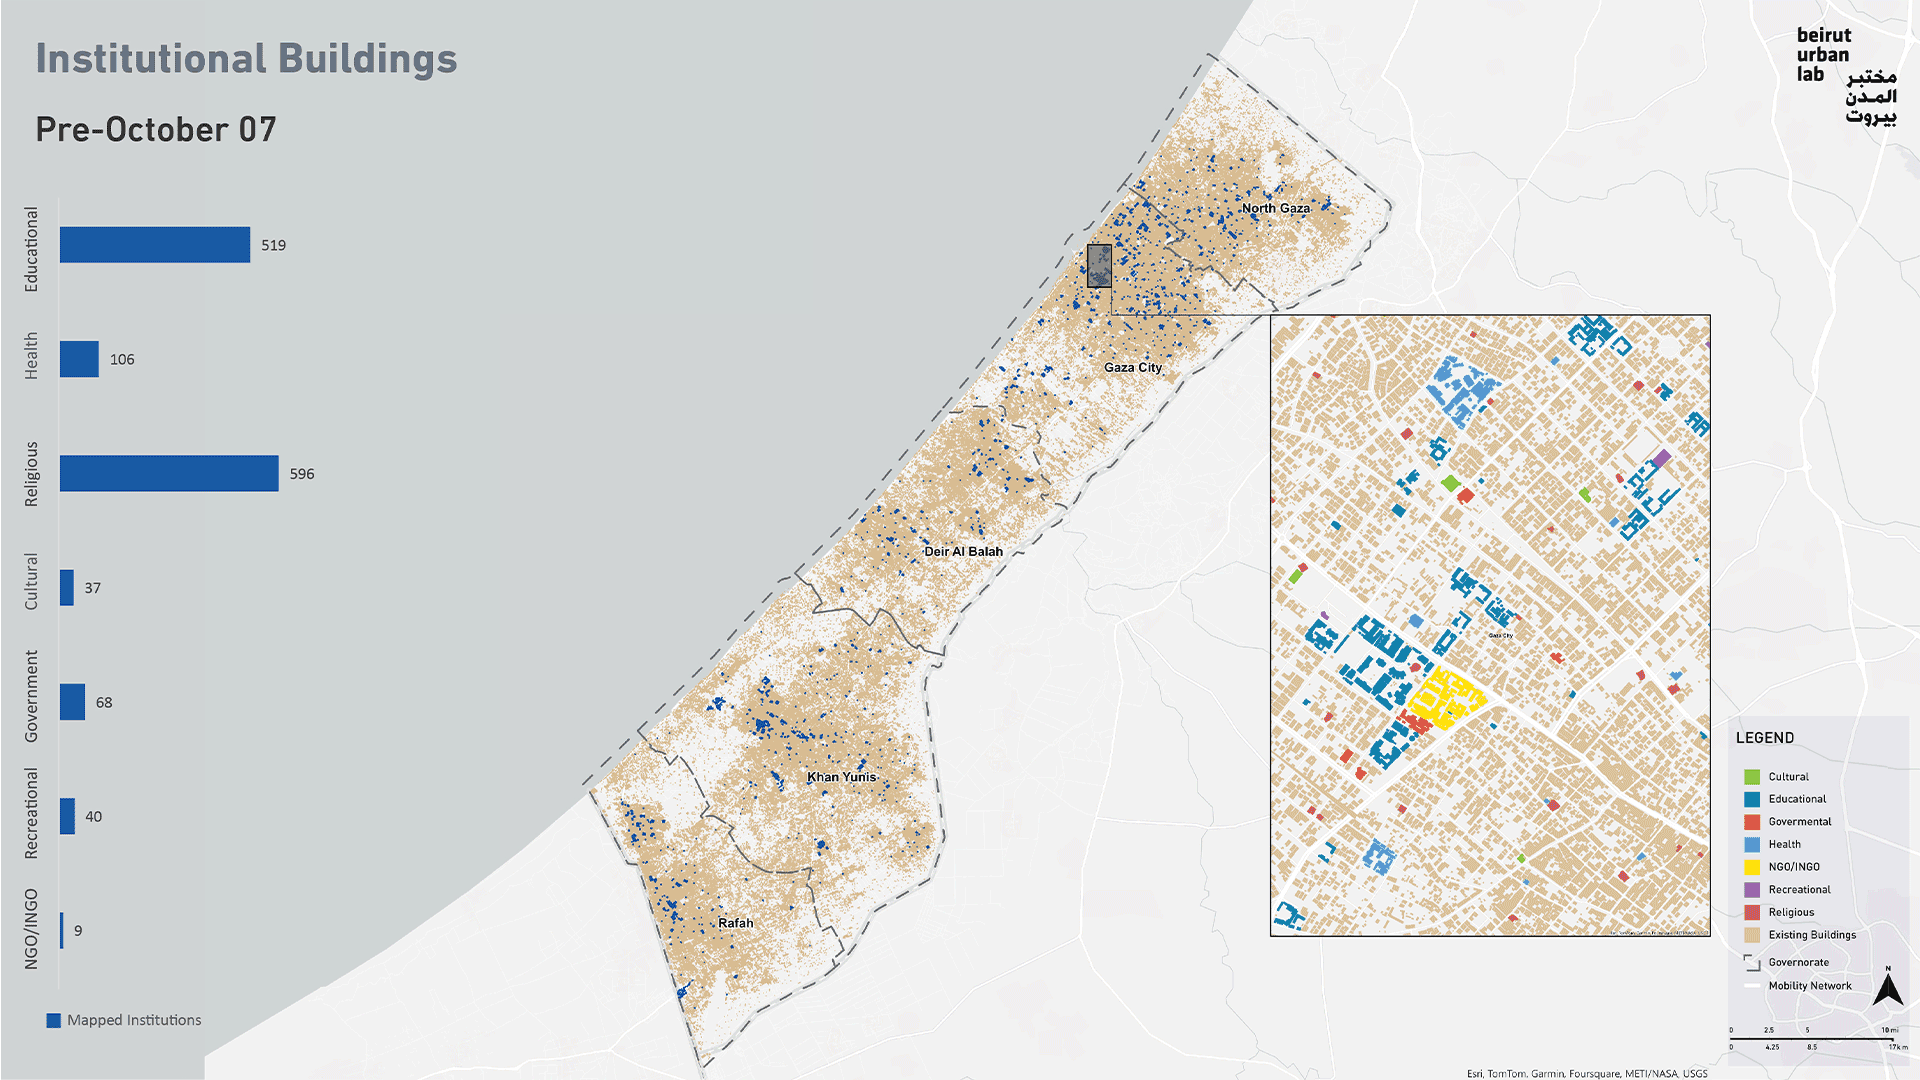 Damages to institutions in Gaza. Source: Beirut Urban Lab based on data from UNOSAT